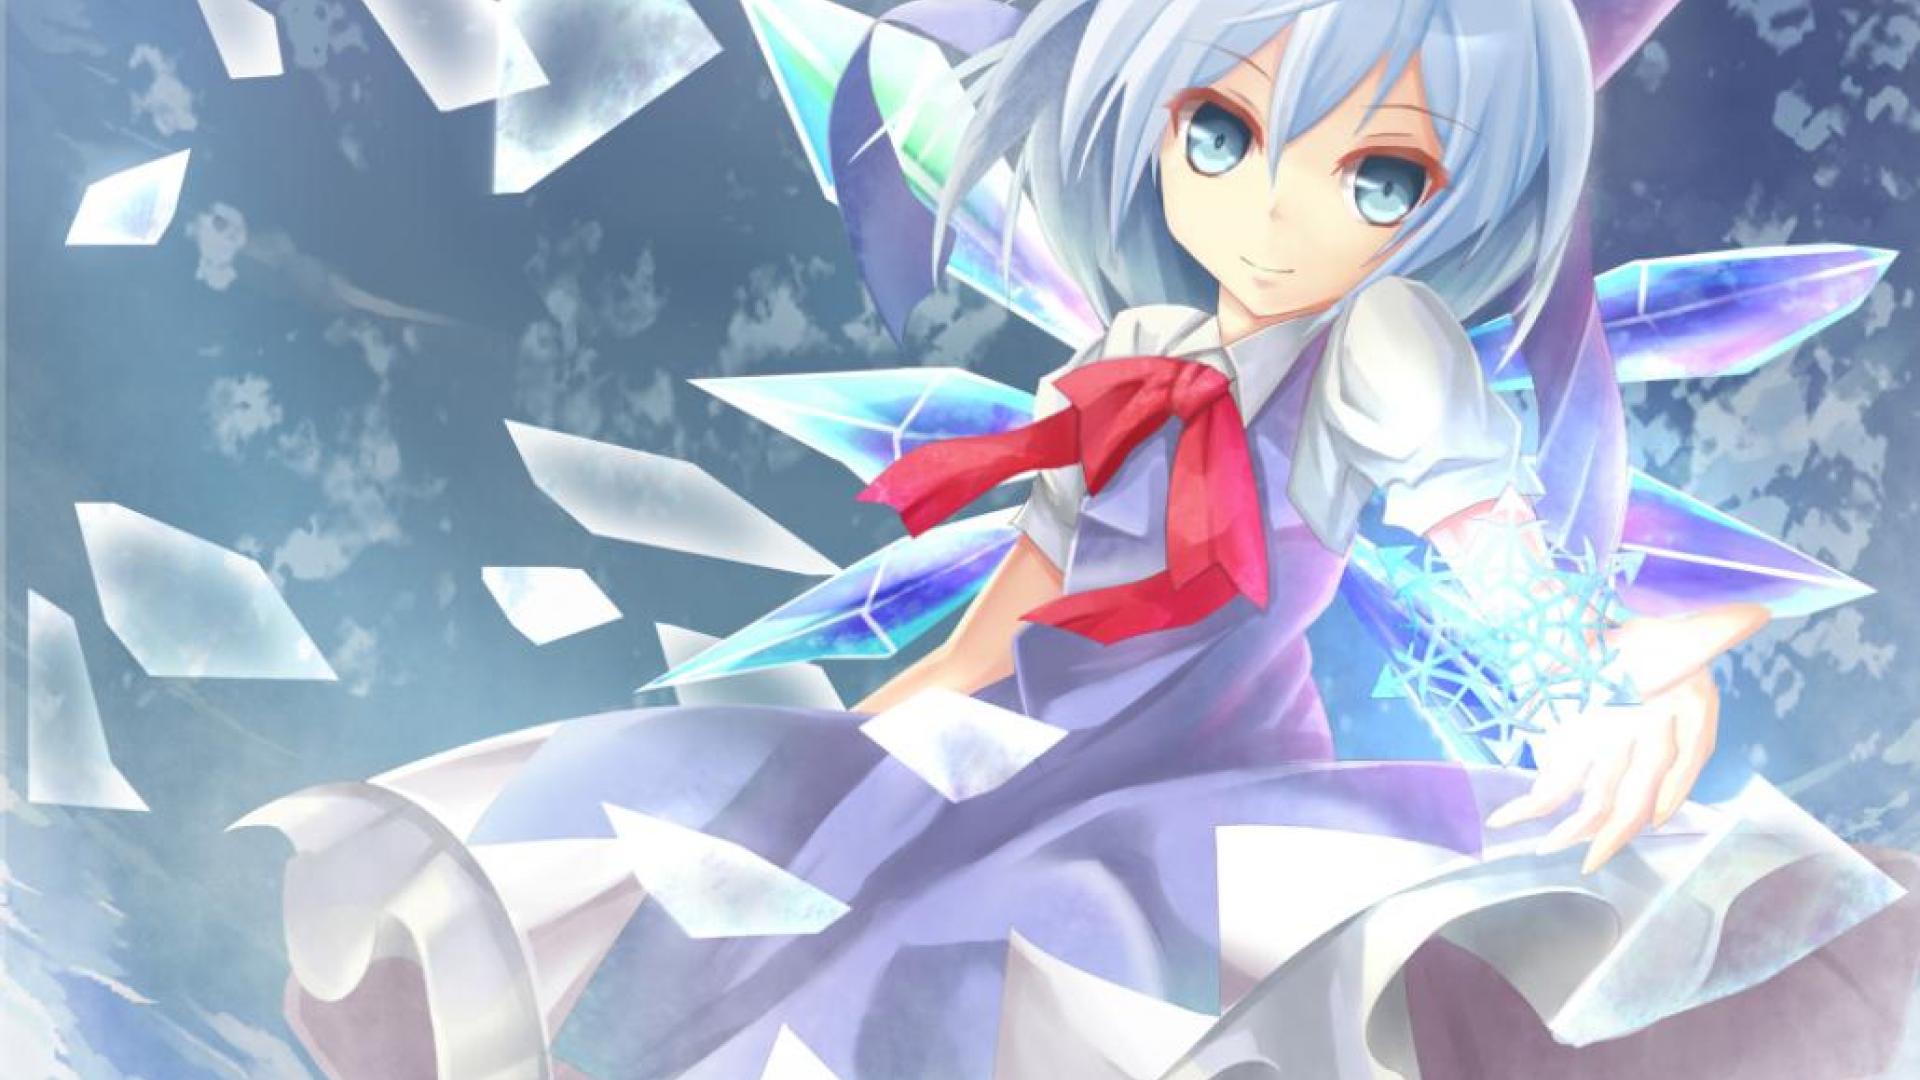 Cirno - (#100819) - High Quality and Resolution Wallpapers on ...